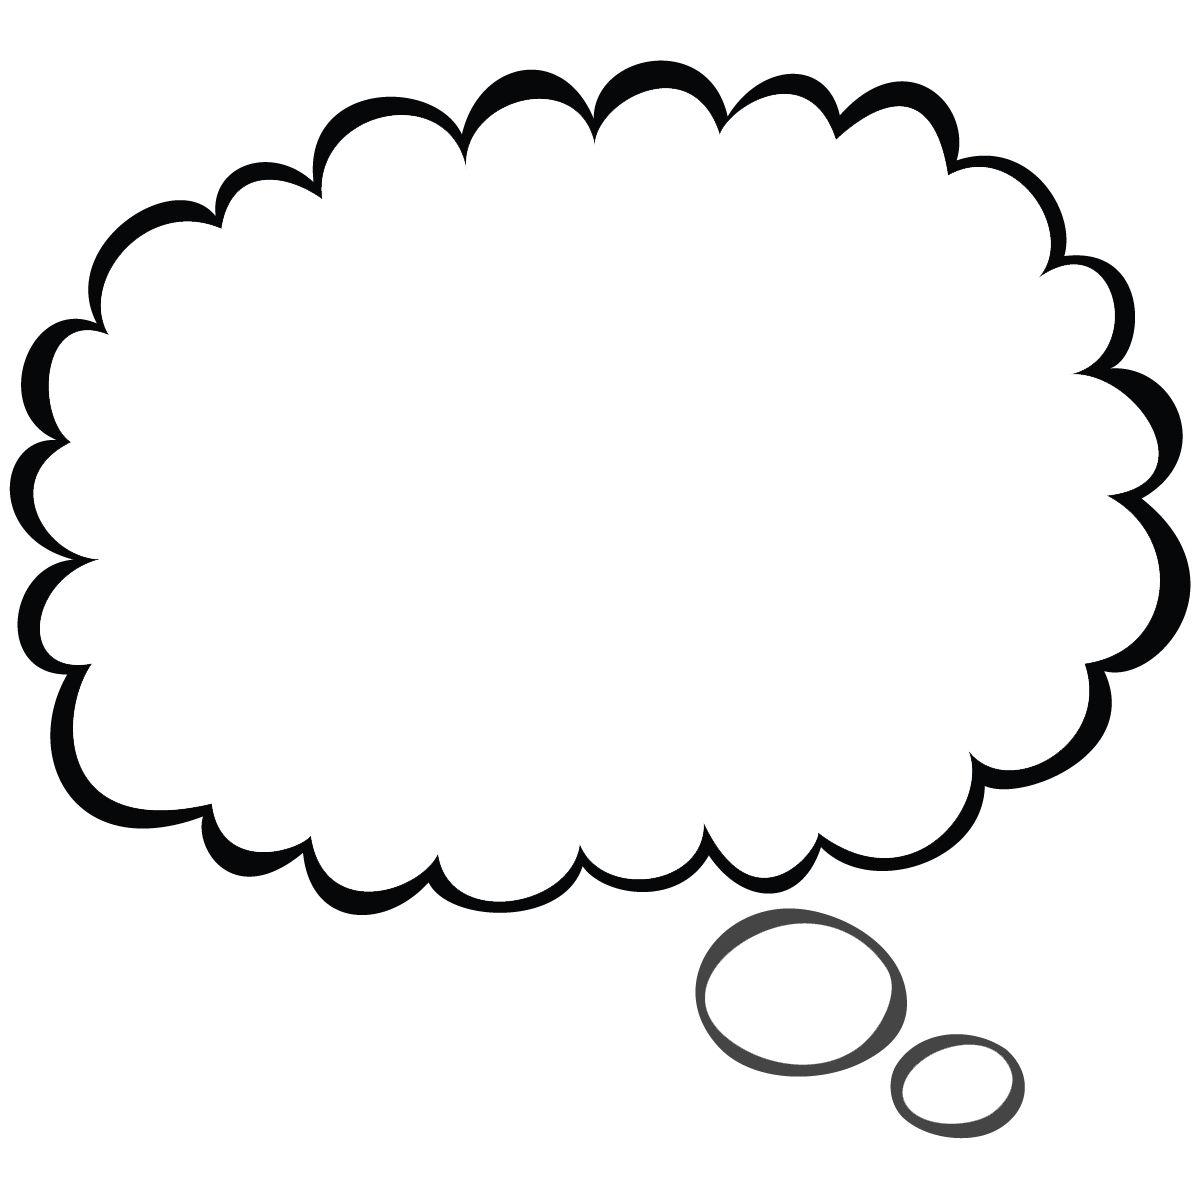 Free Thought Cloud Transparent, Download Free Thought Cloud Transparent